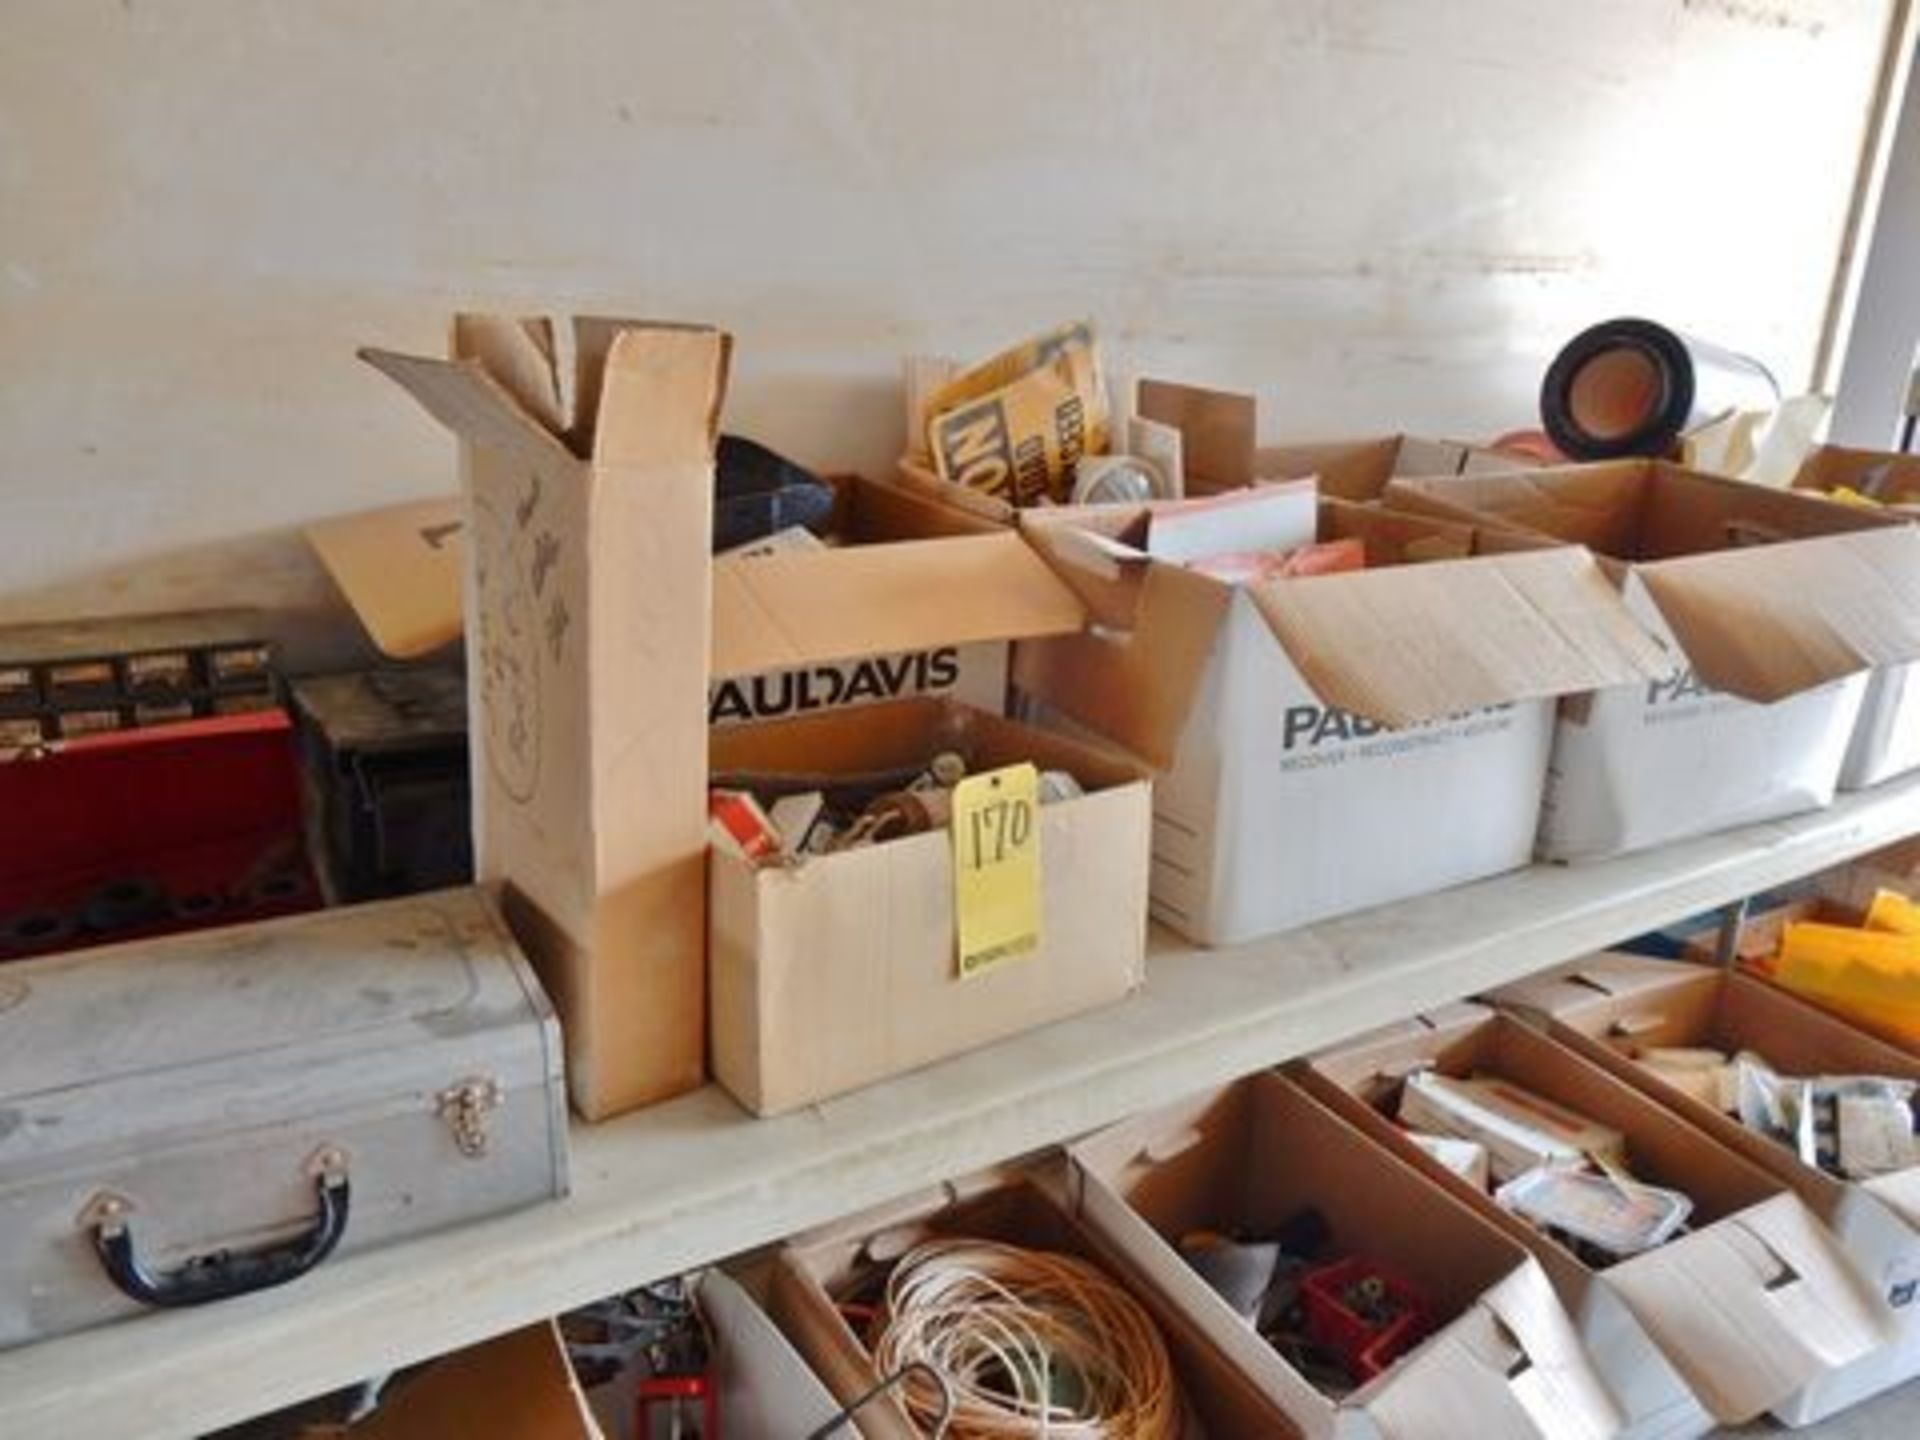 LOT BOXES & MISC. ITEMS TO INCLUDE FUSES, HARDWARE, ETC. - ON TOP OF TABLE